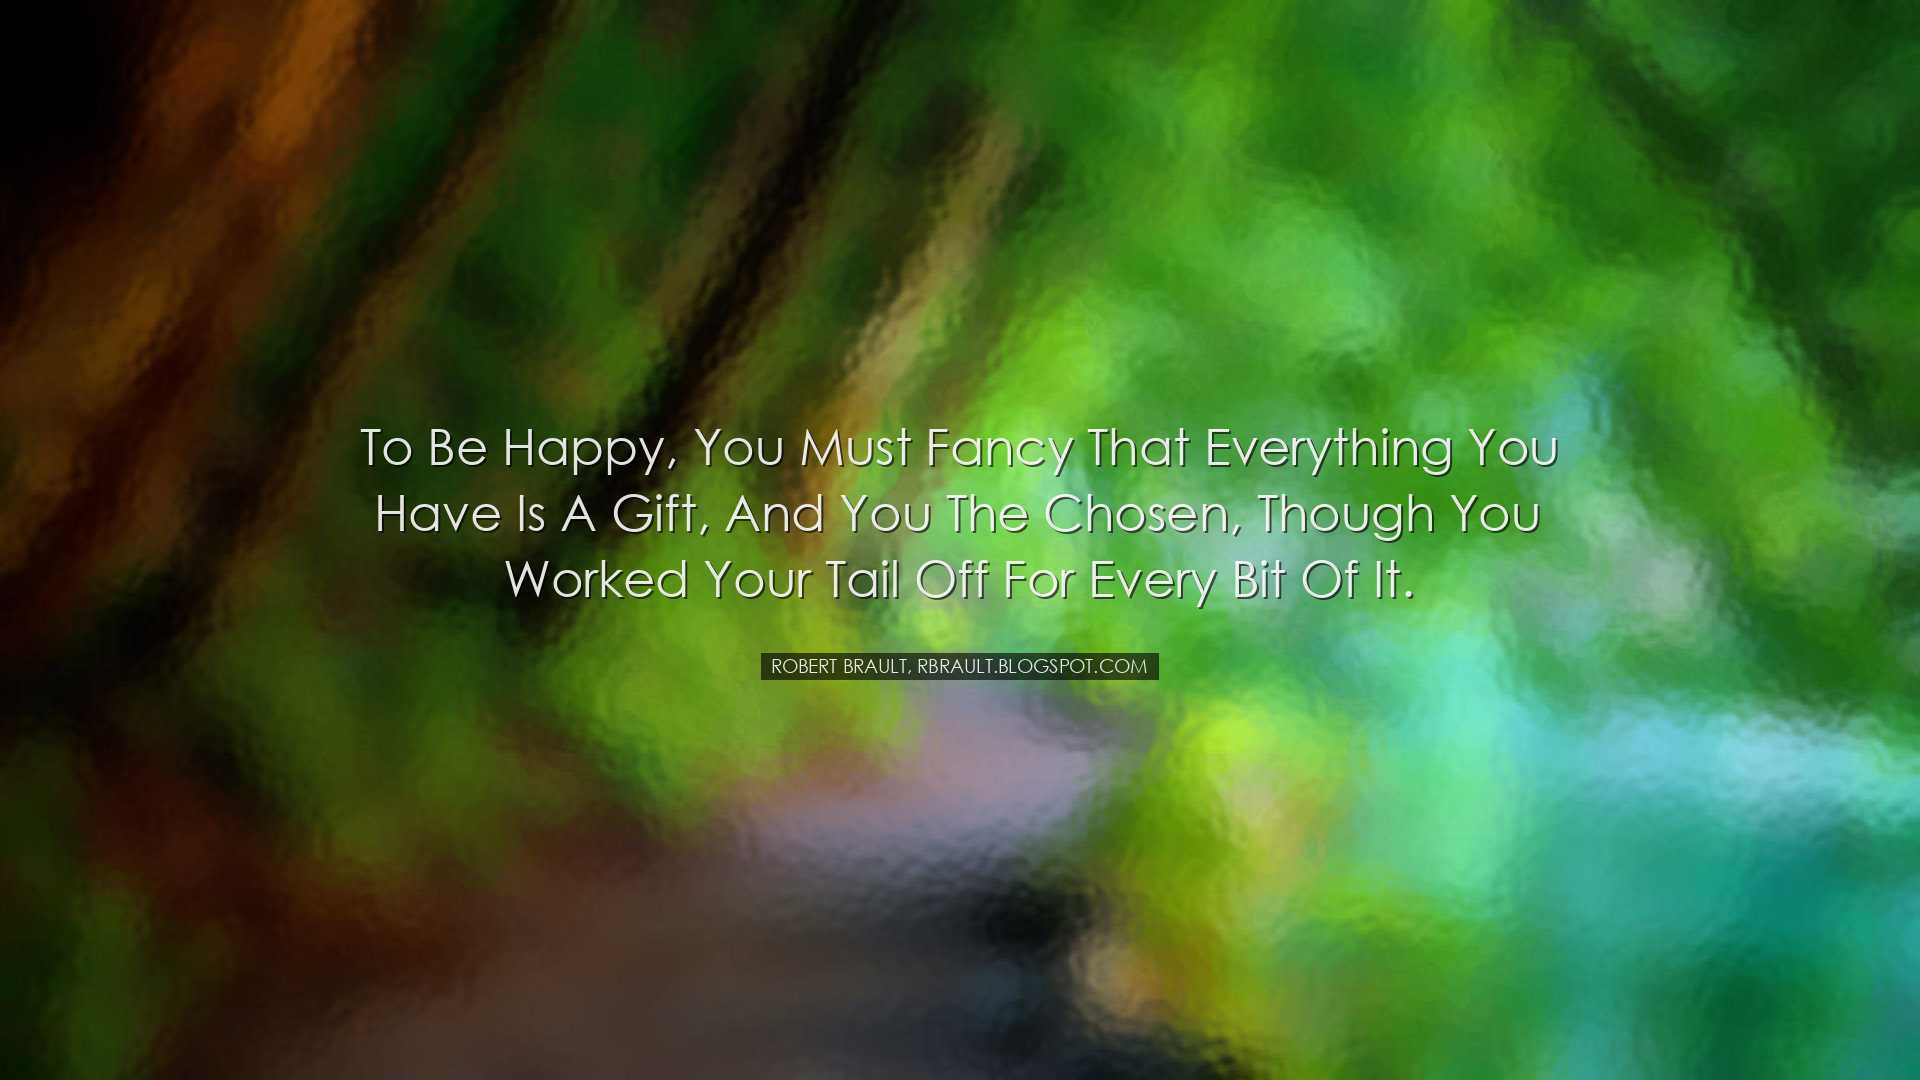 To be happy, you must fancy that everything you have is a gift, an